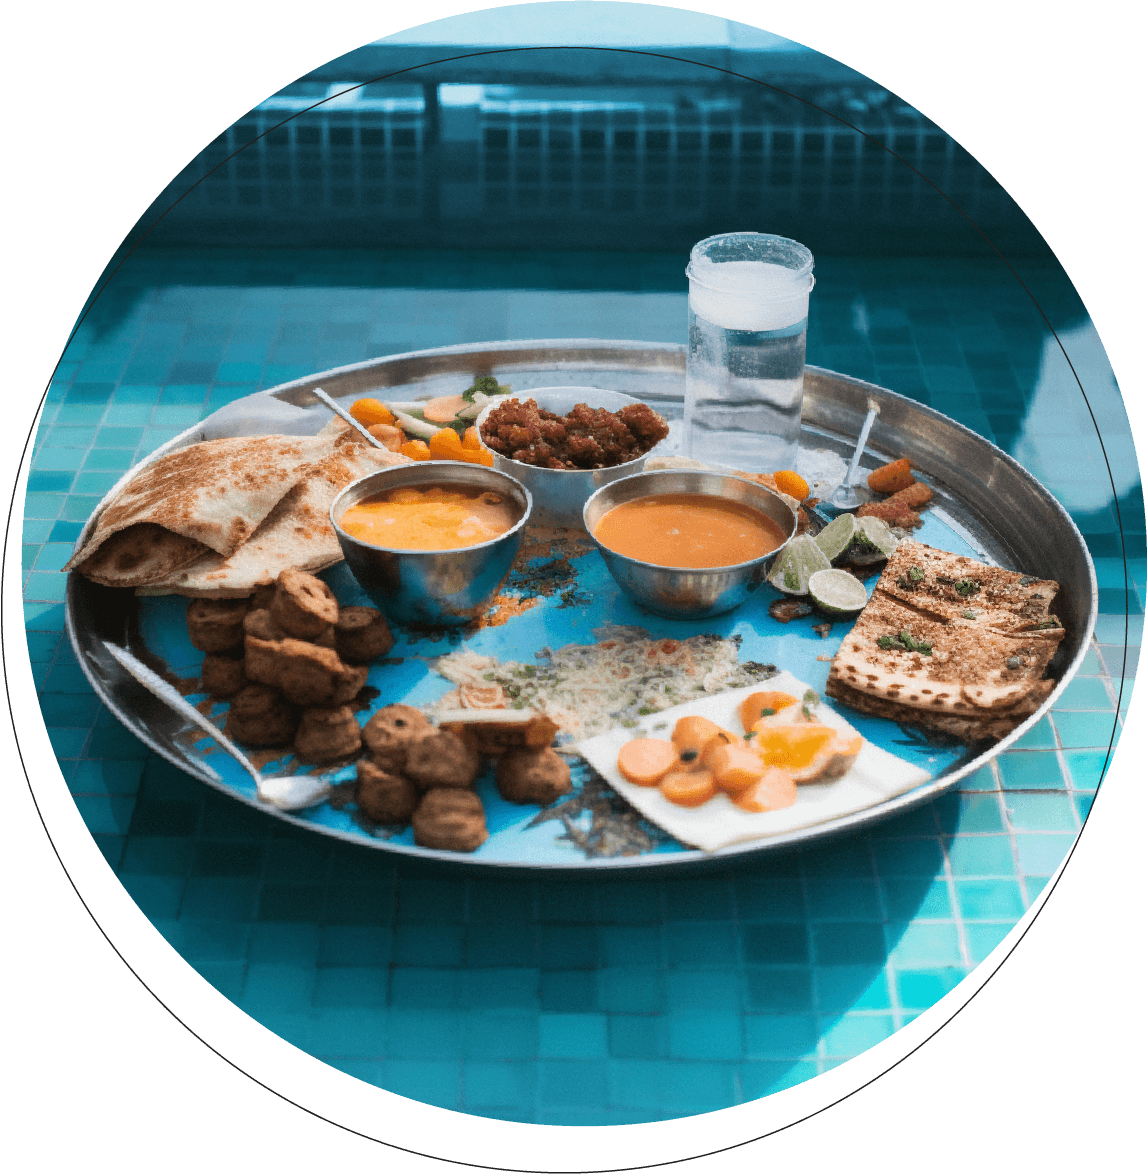 Pool floating breakfast for Manasa rooms on request